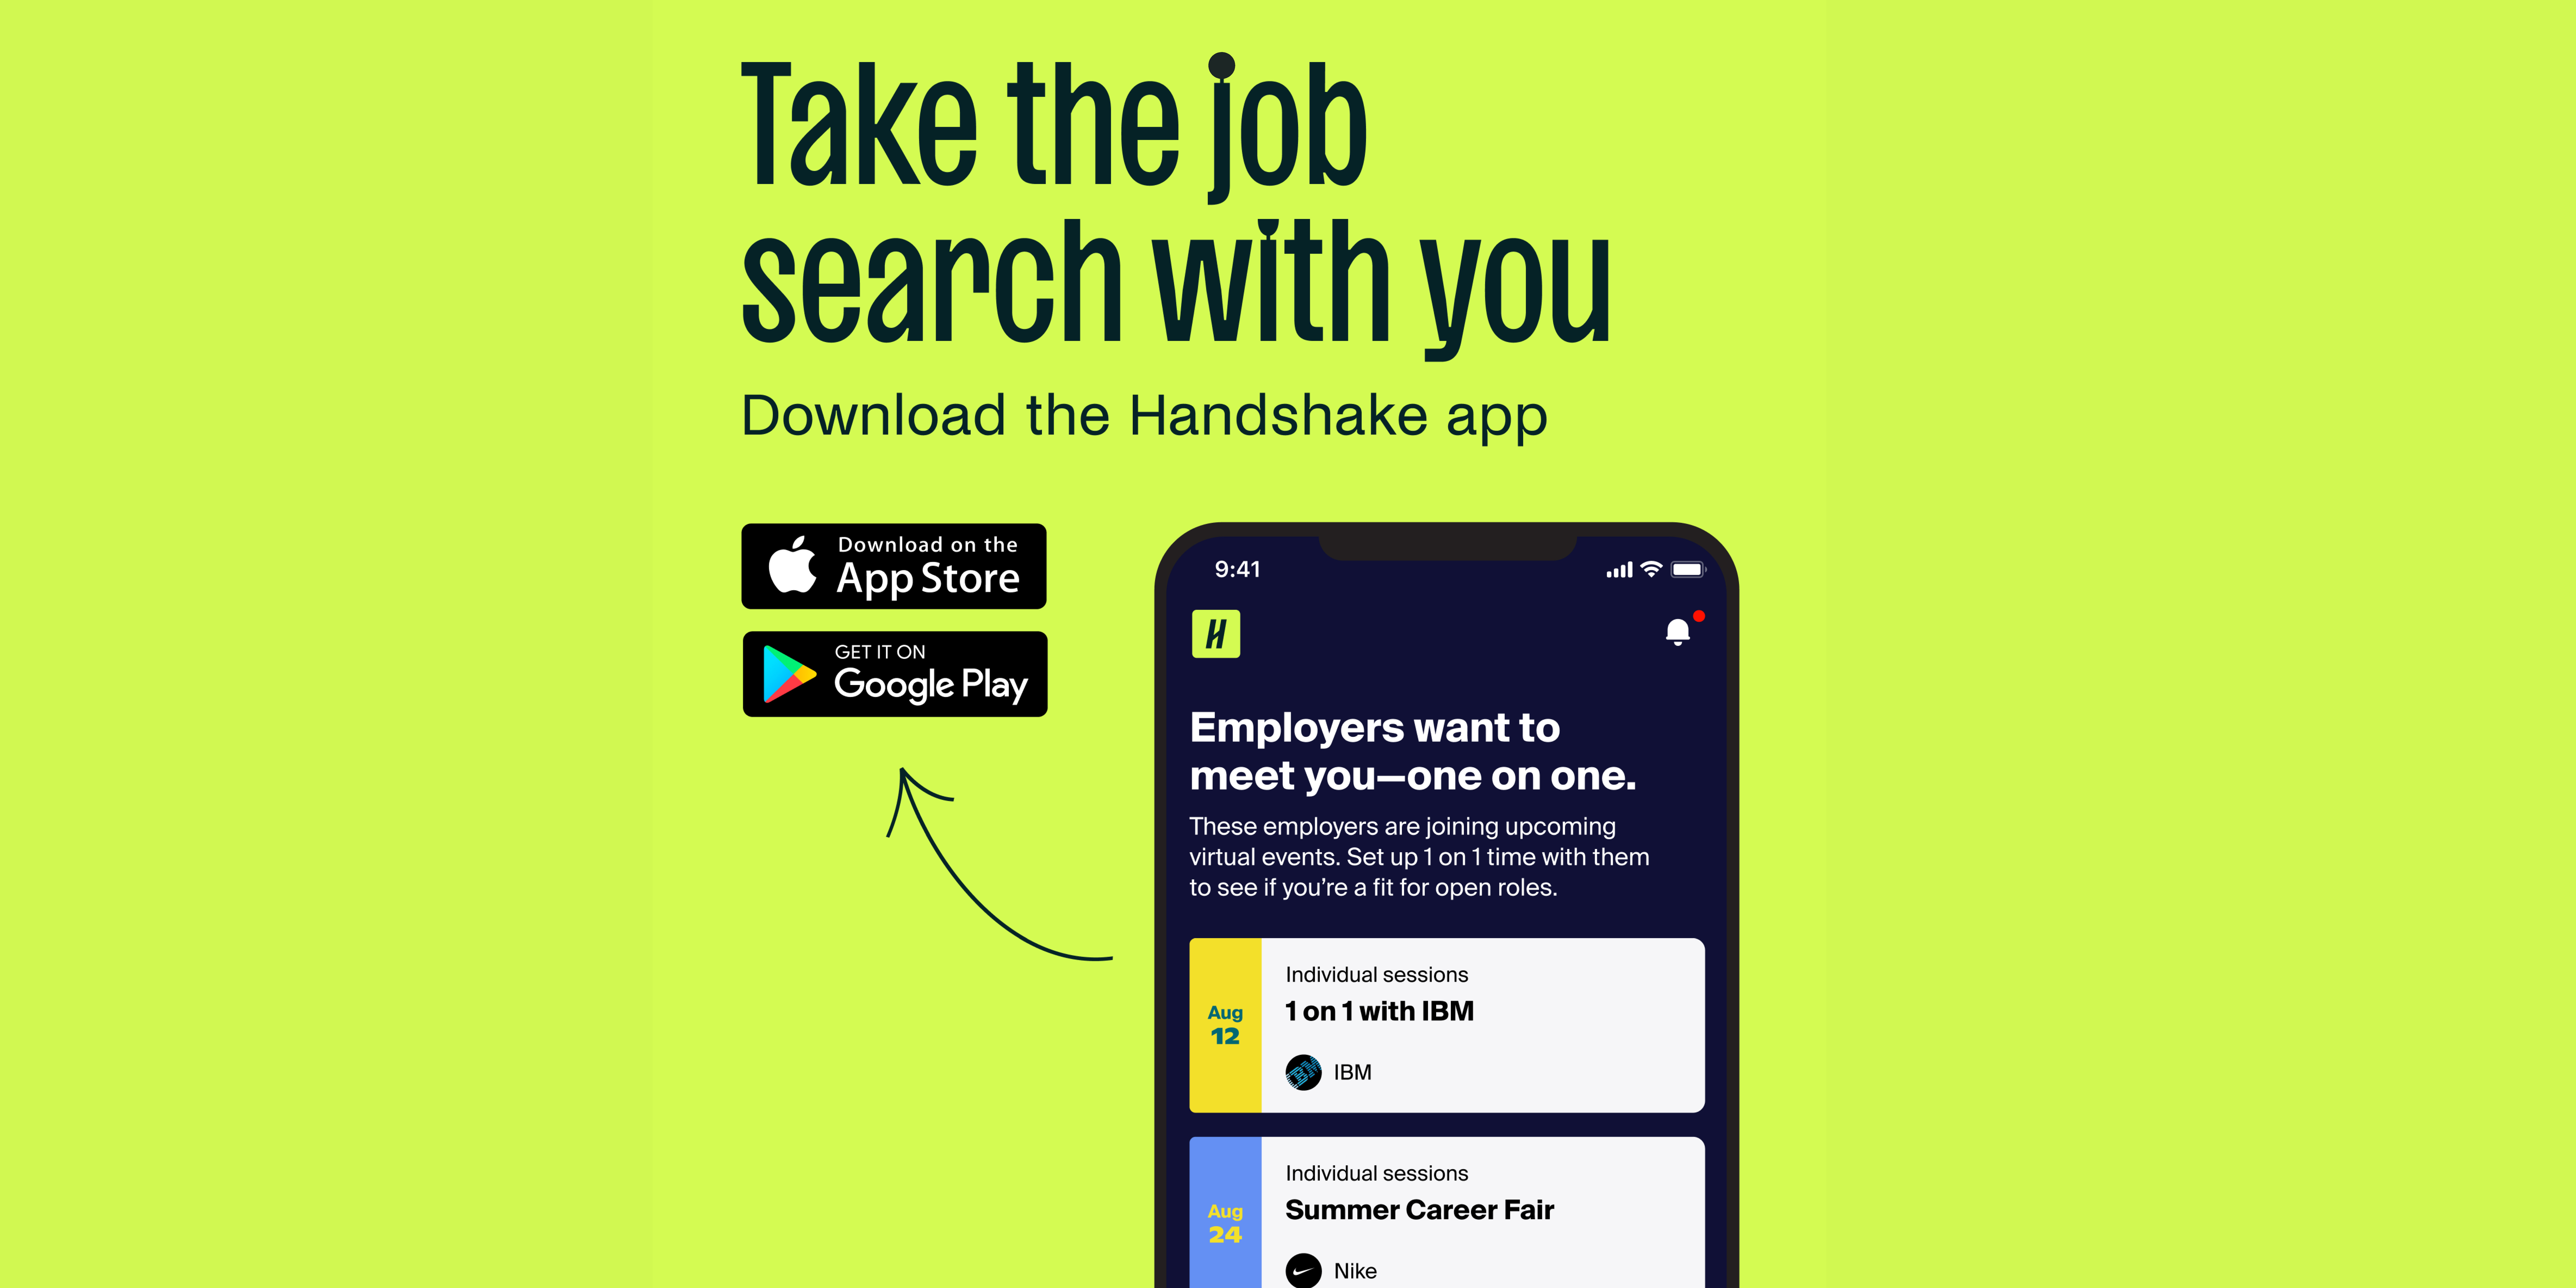 Take the job search with you by downloading the Handshake app.